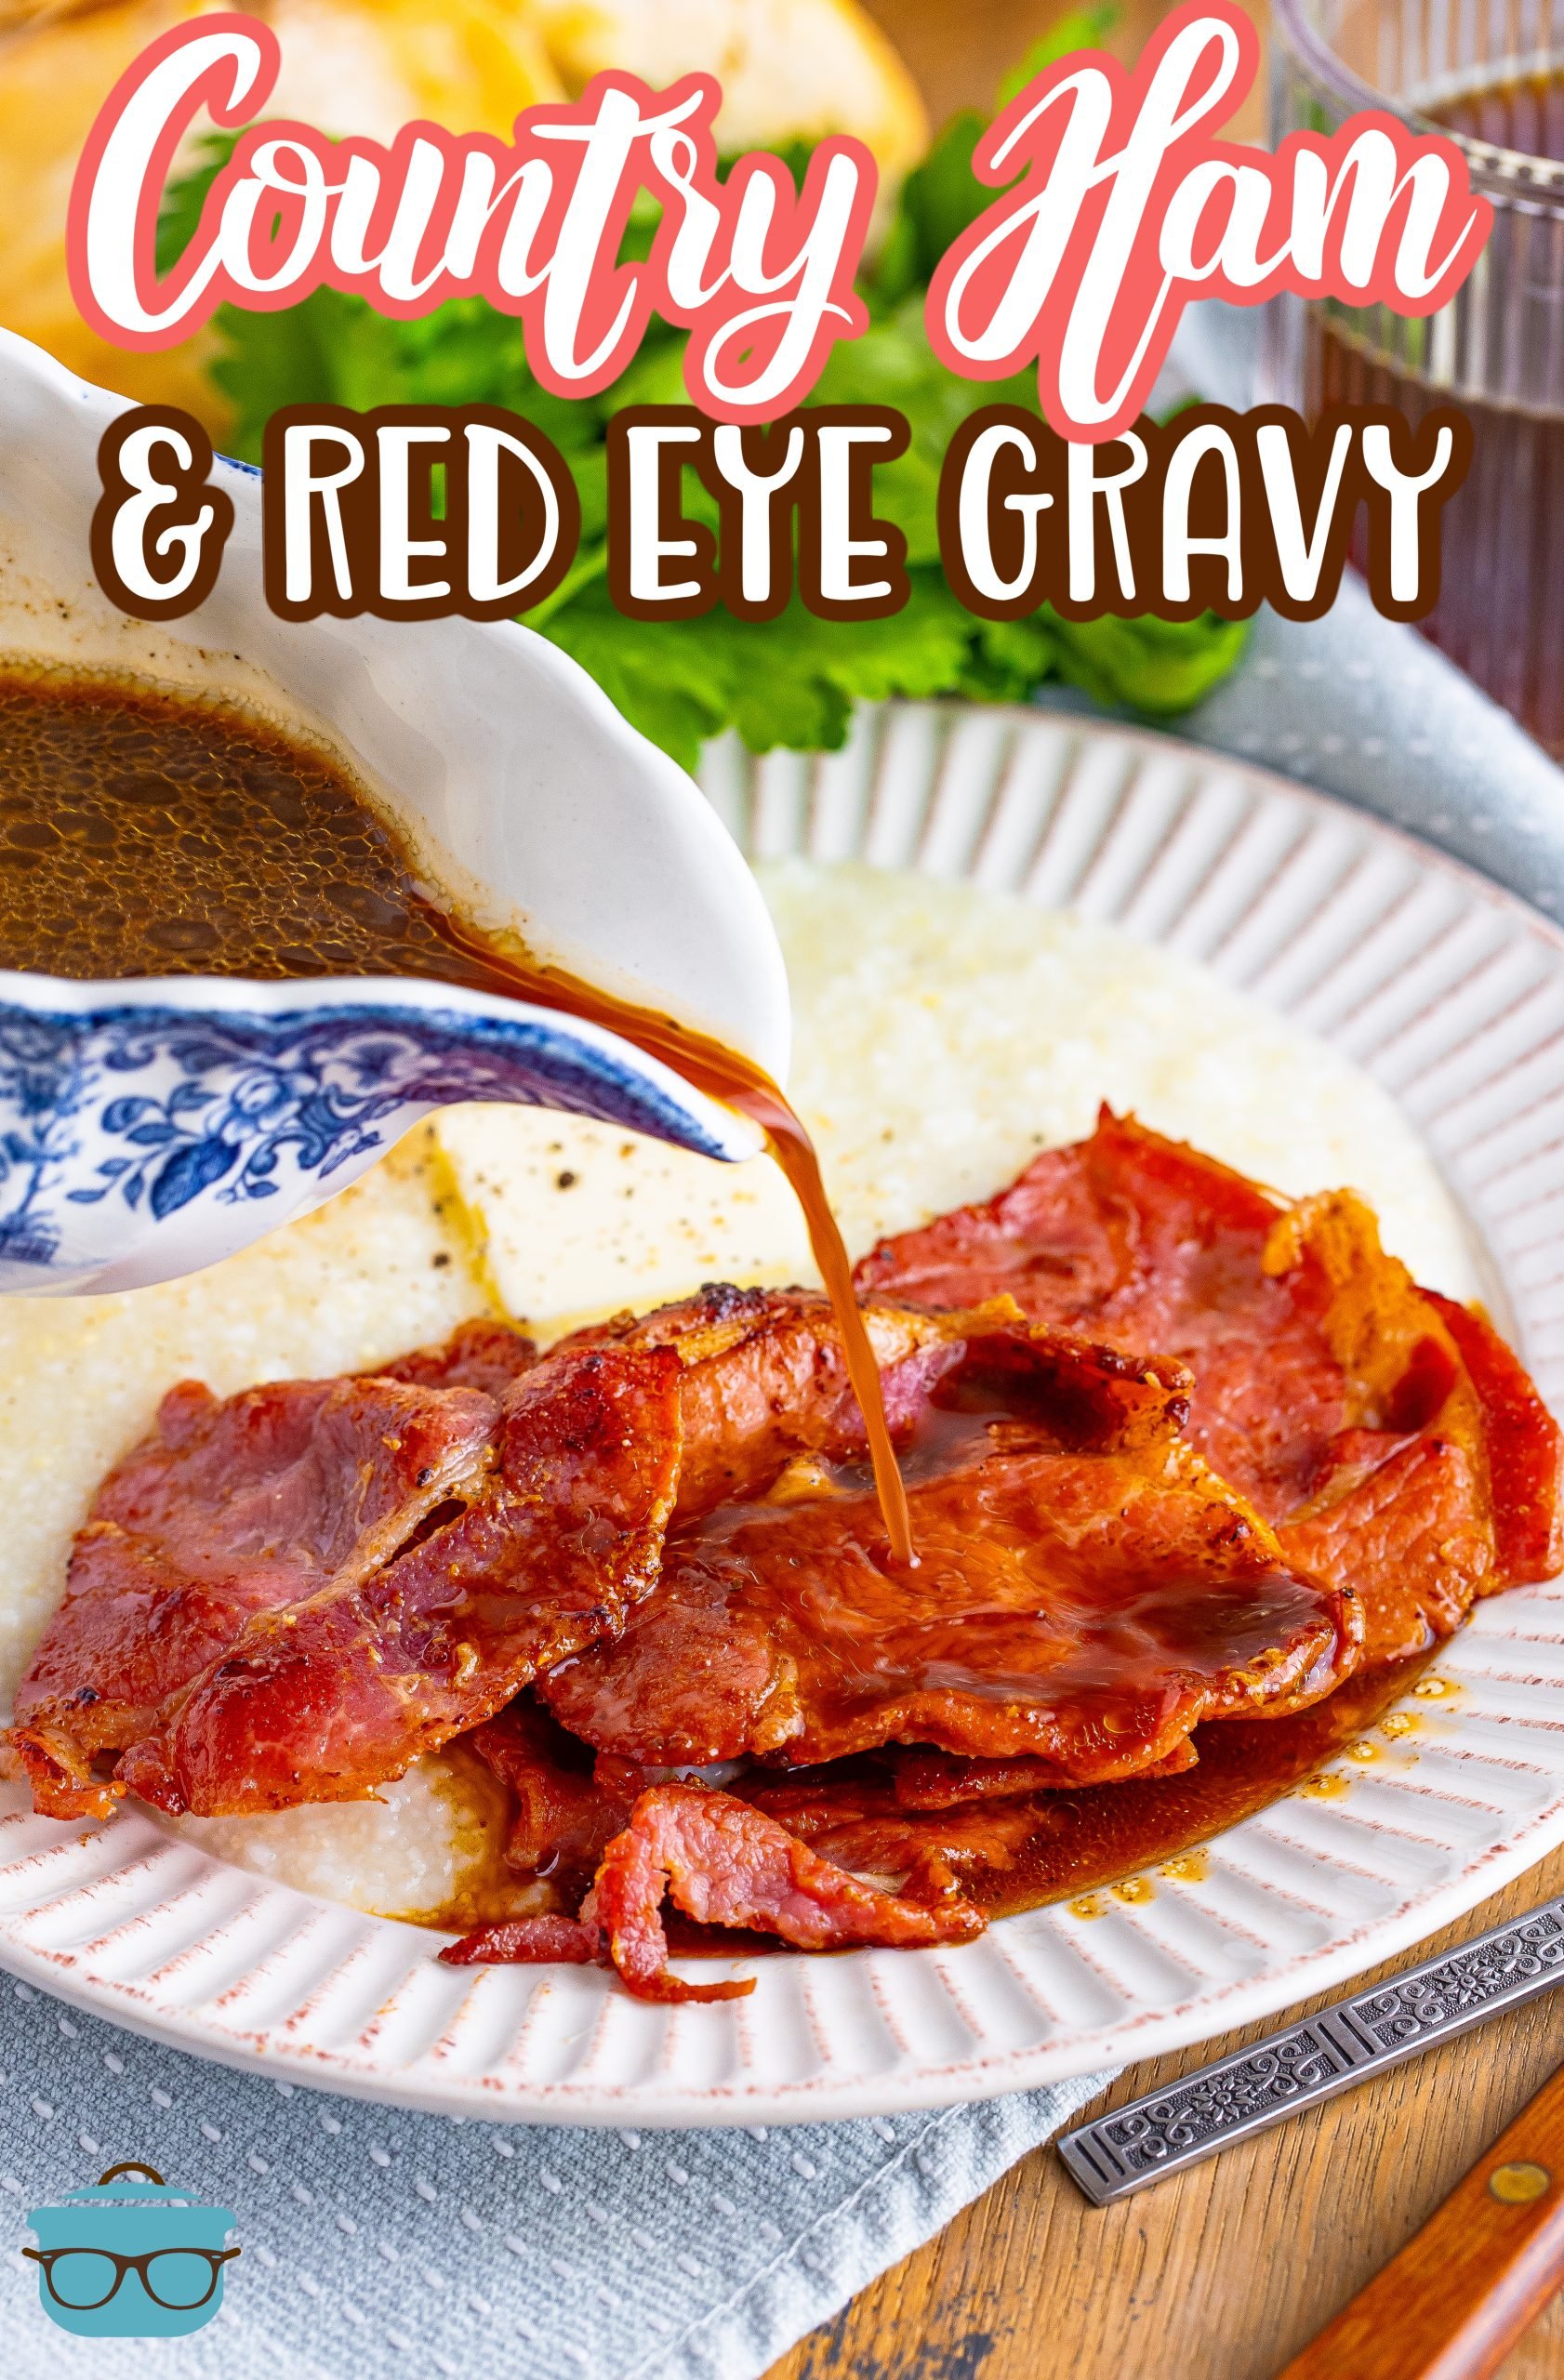 Gravy being poured on a serving of Country Ham and Red Eye Gravy on a plate.